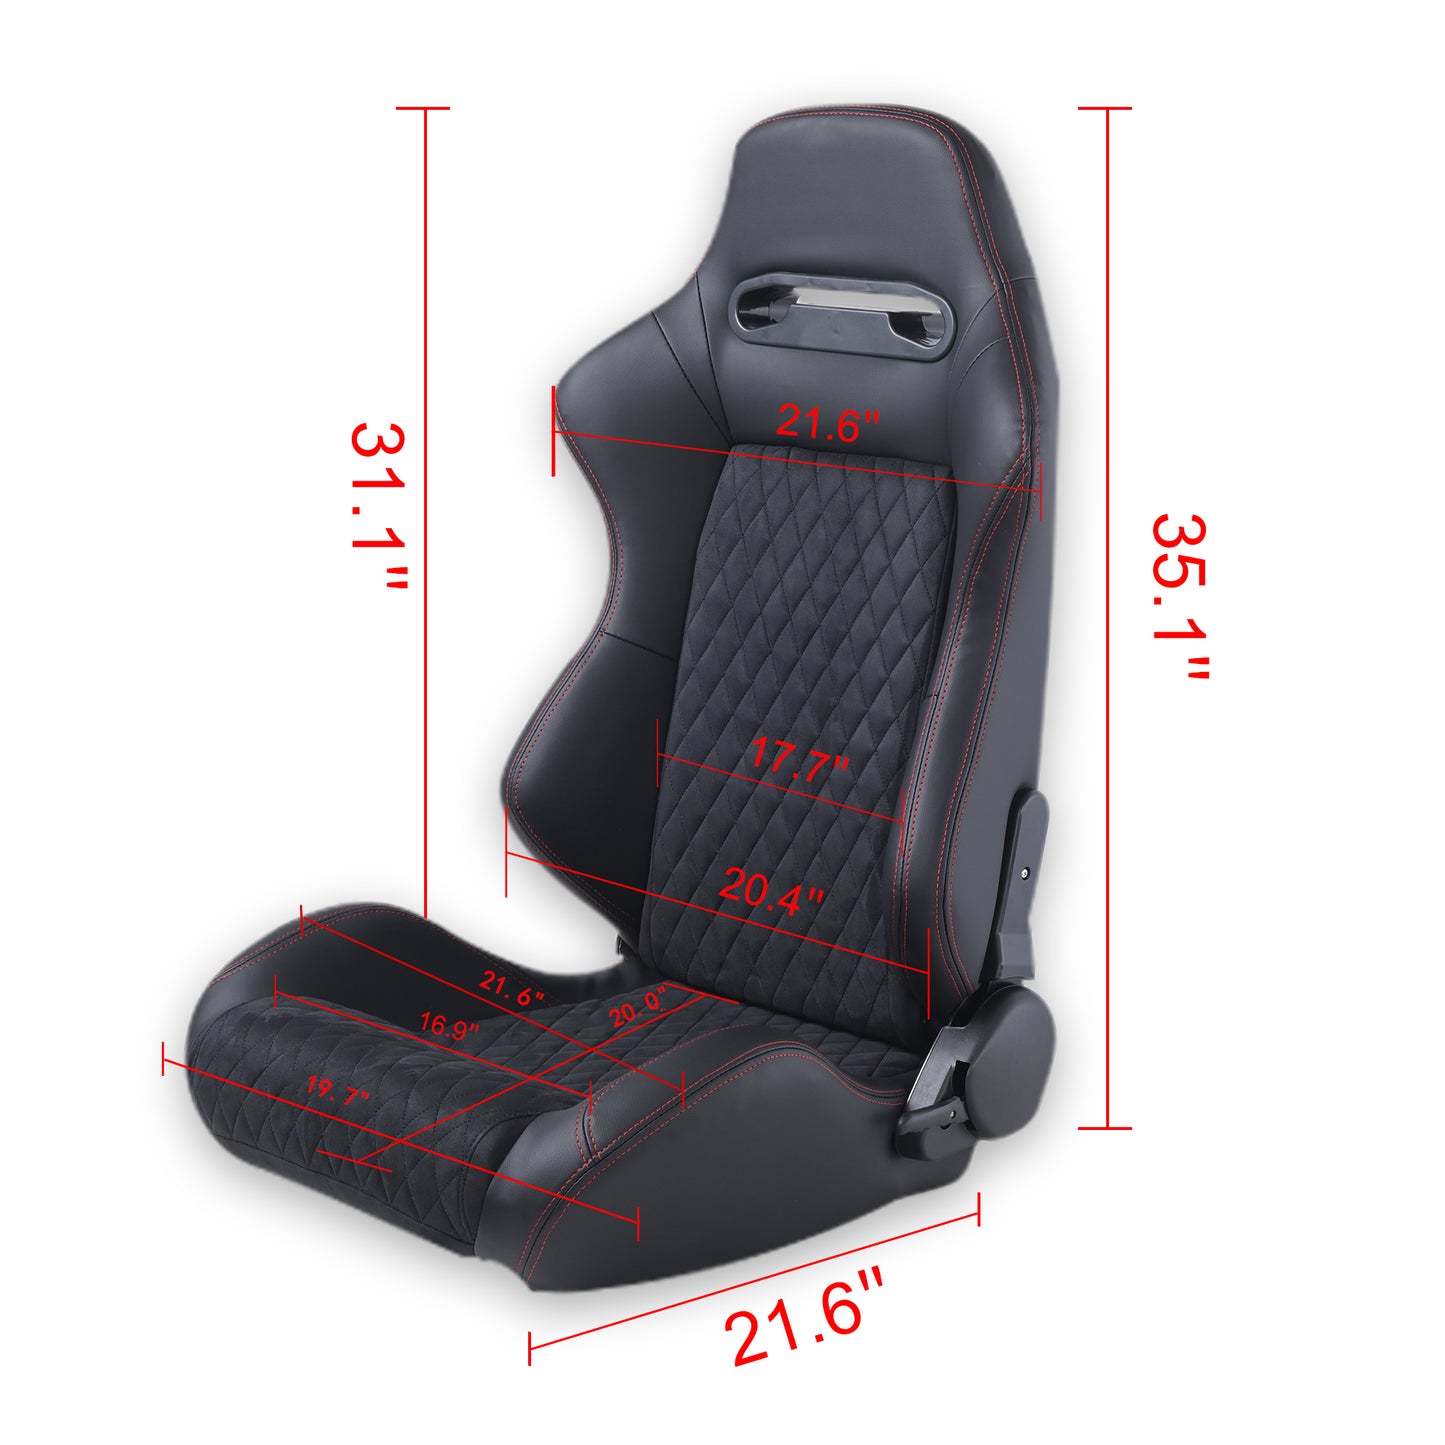 RACING SEAT HIGH QUALITY PVC WITH SUADE MATERIAL DOUBLE SLIDER  2PCS